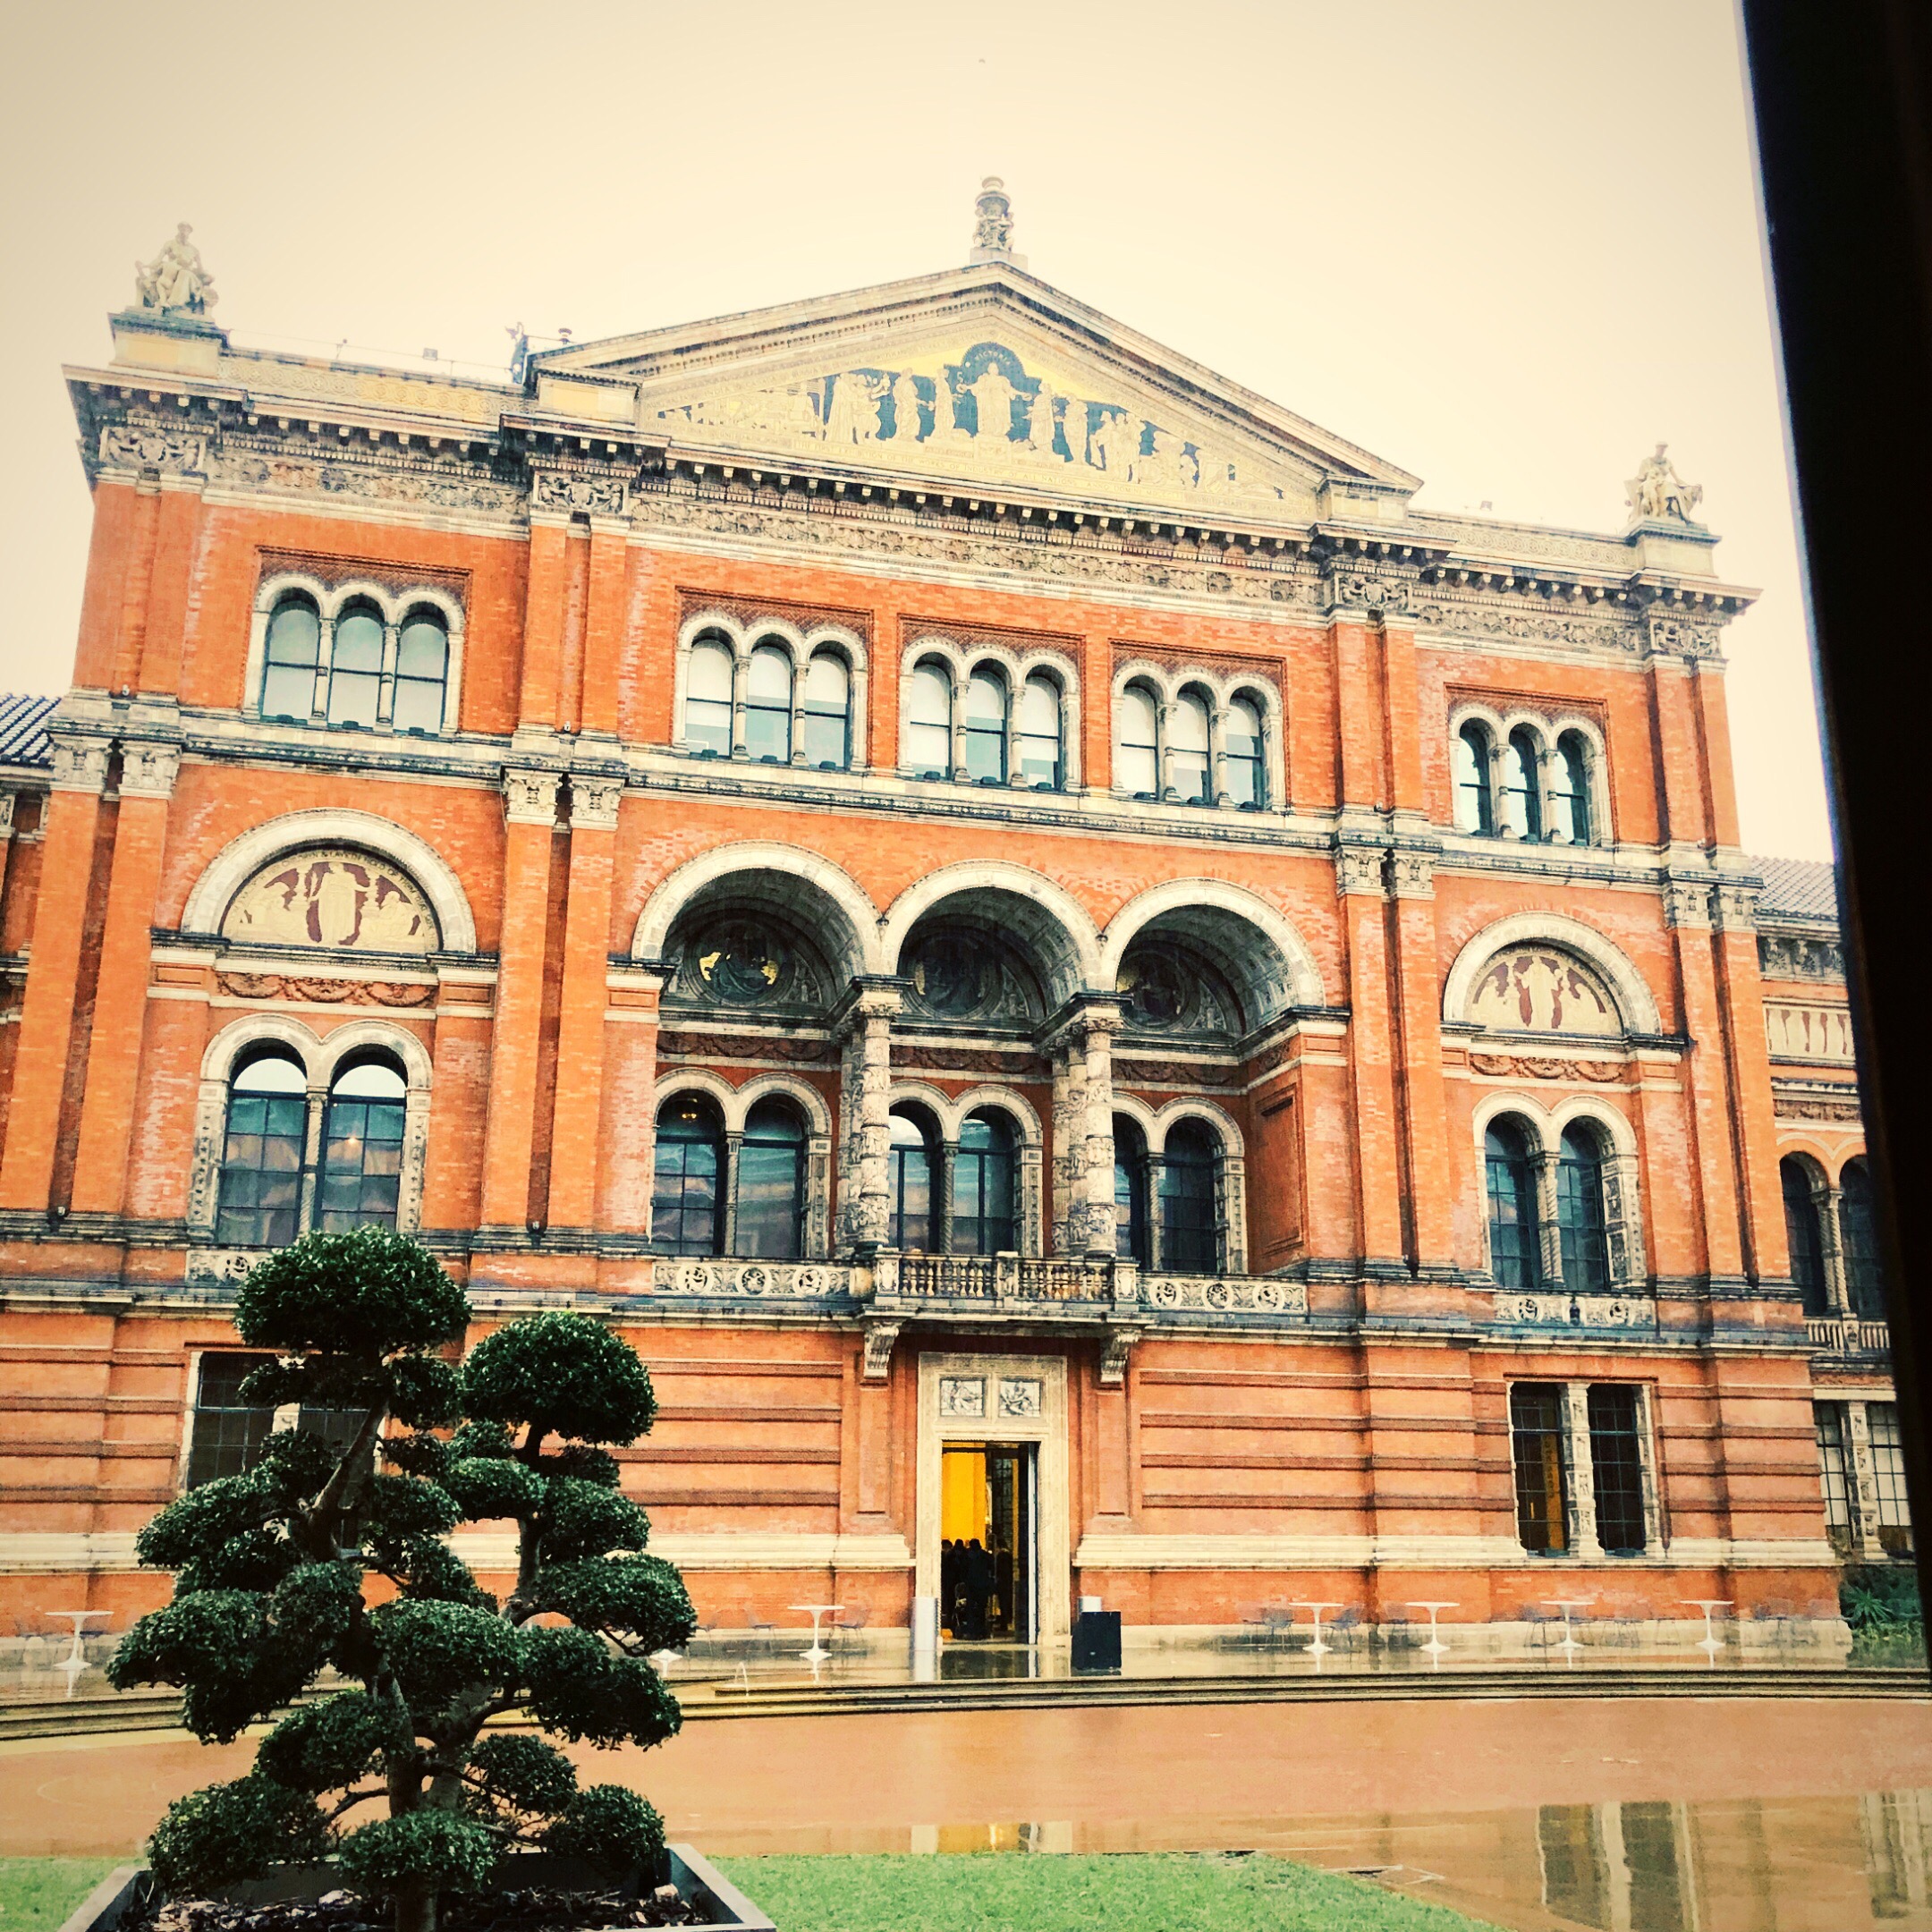 V&A Museum in London